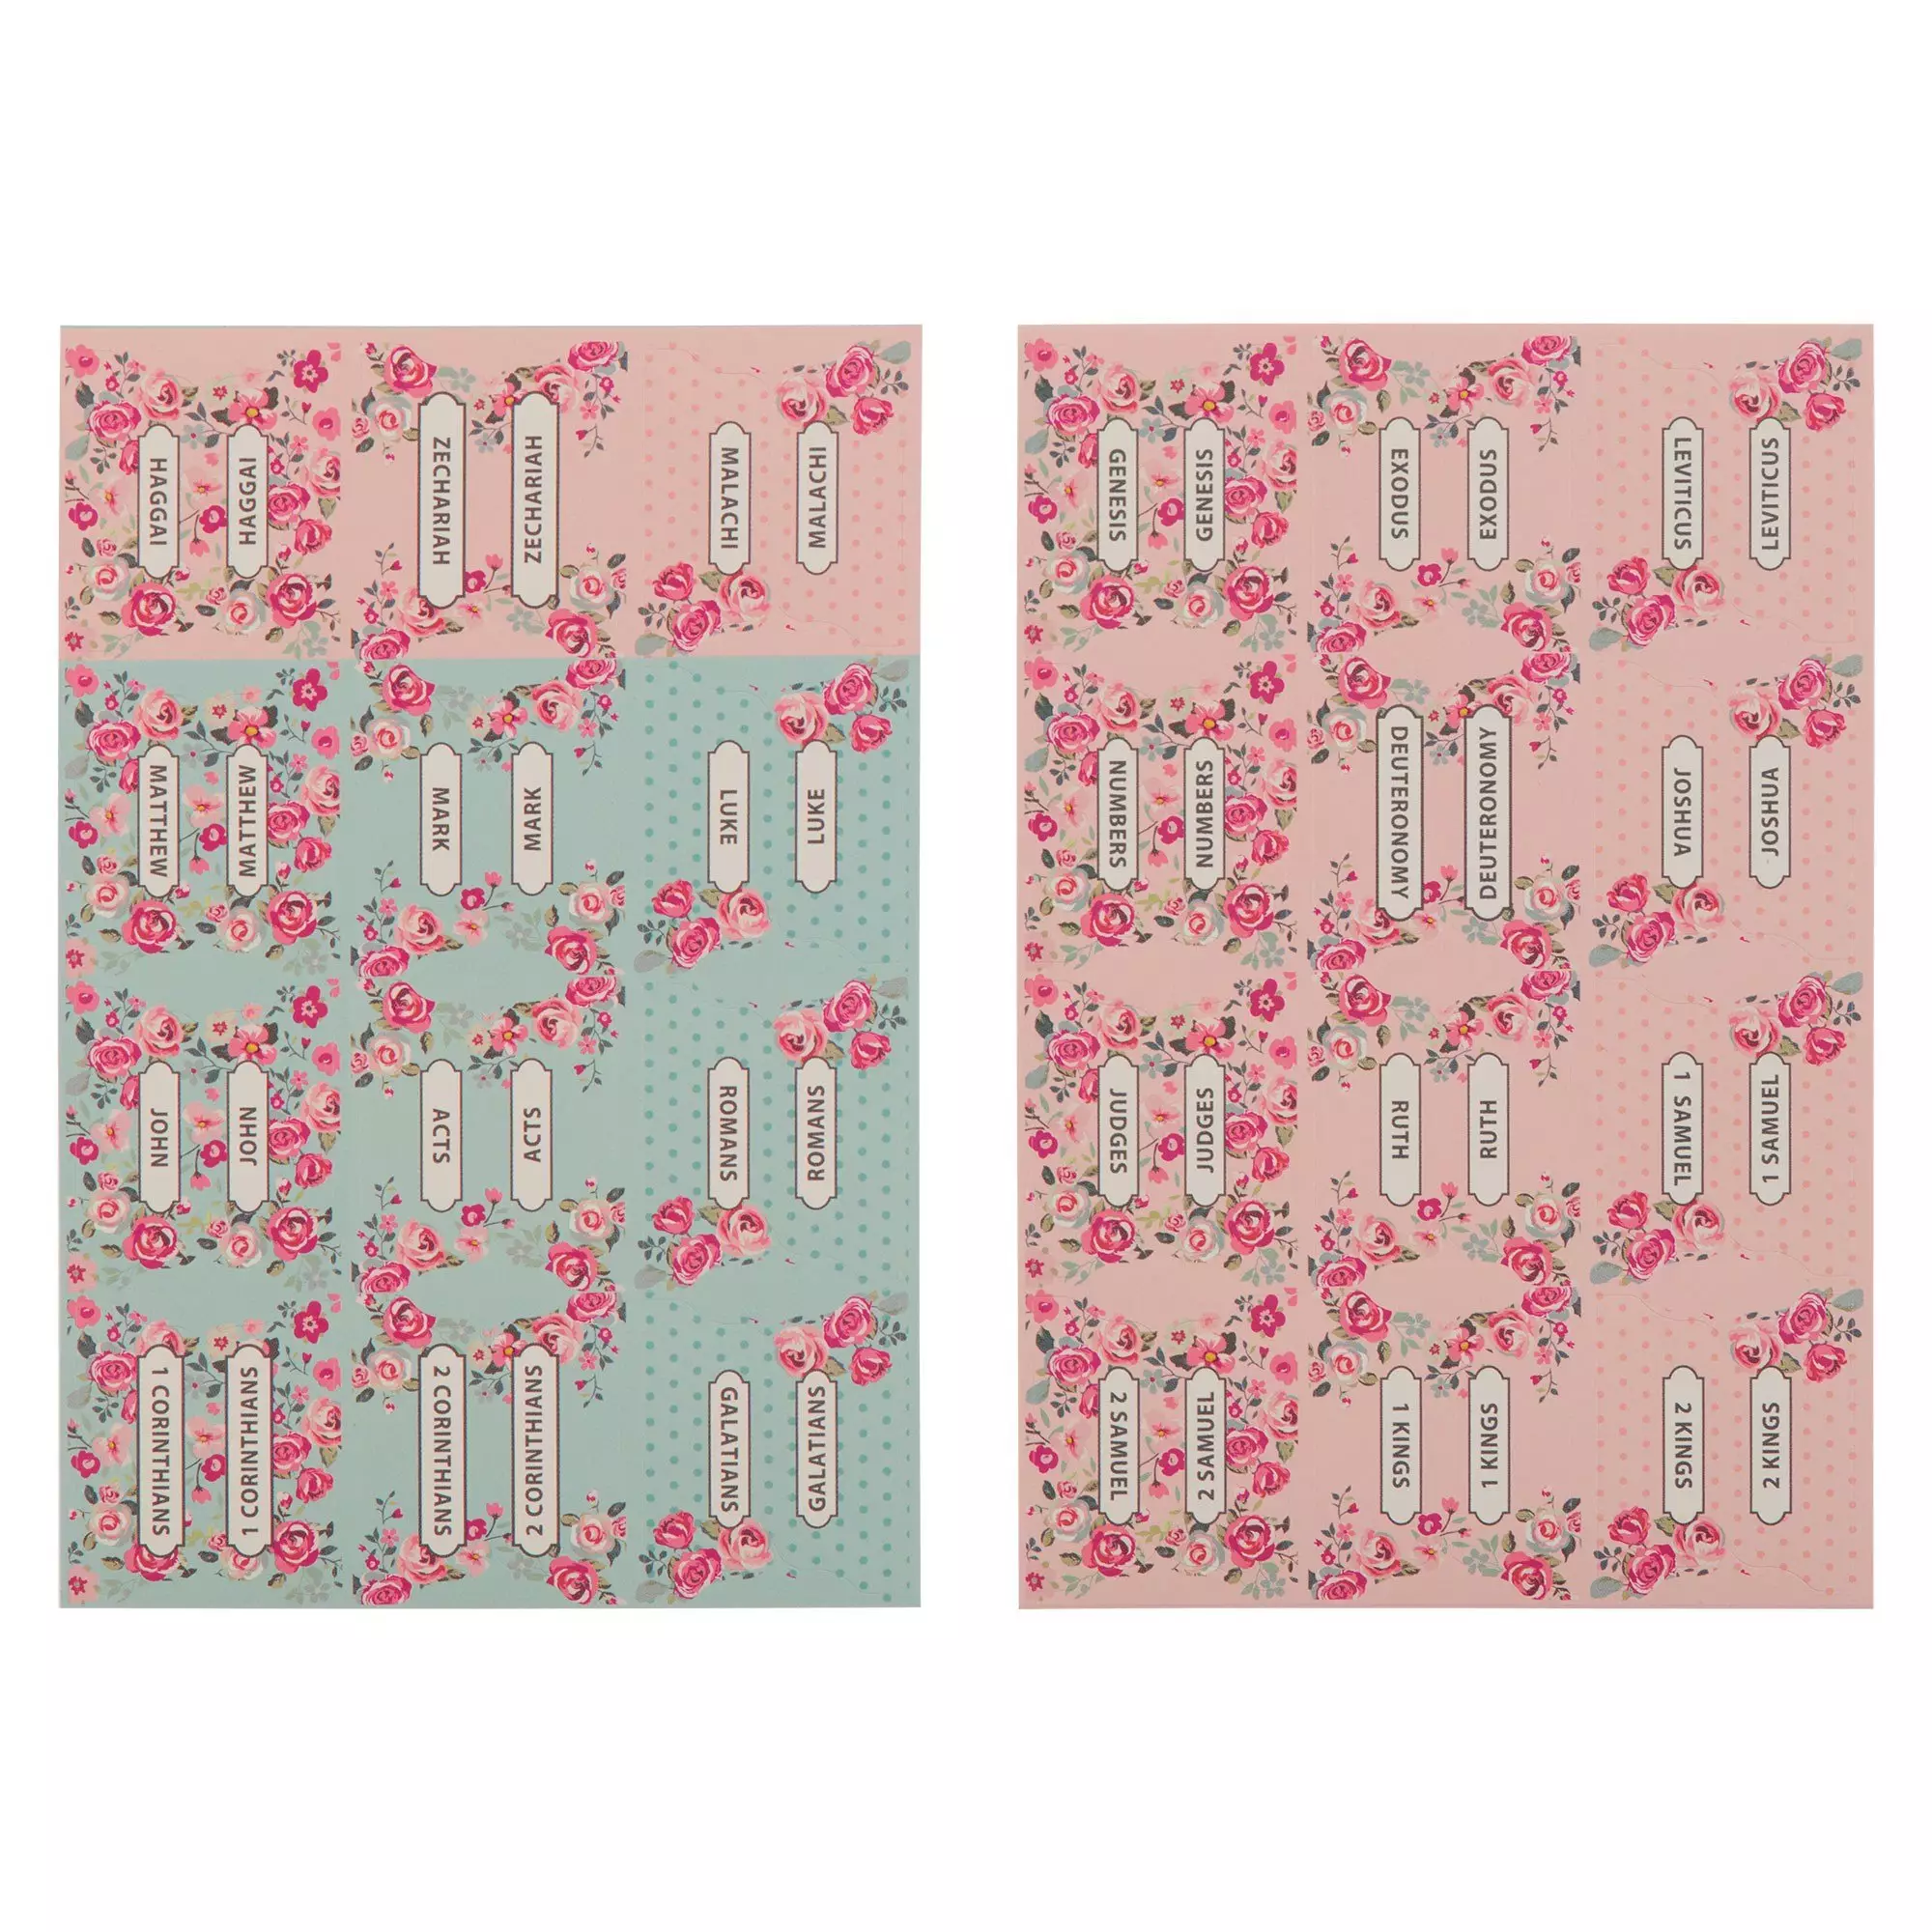 Bible Indexing Tabs Floral Pink & Teal